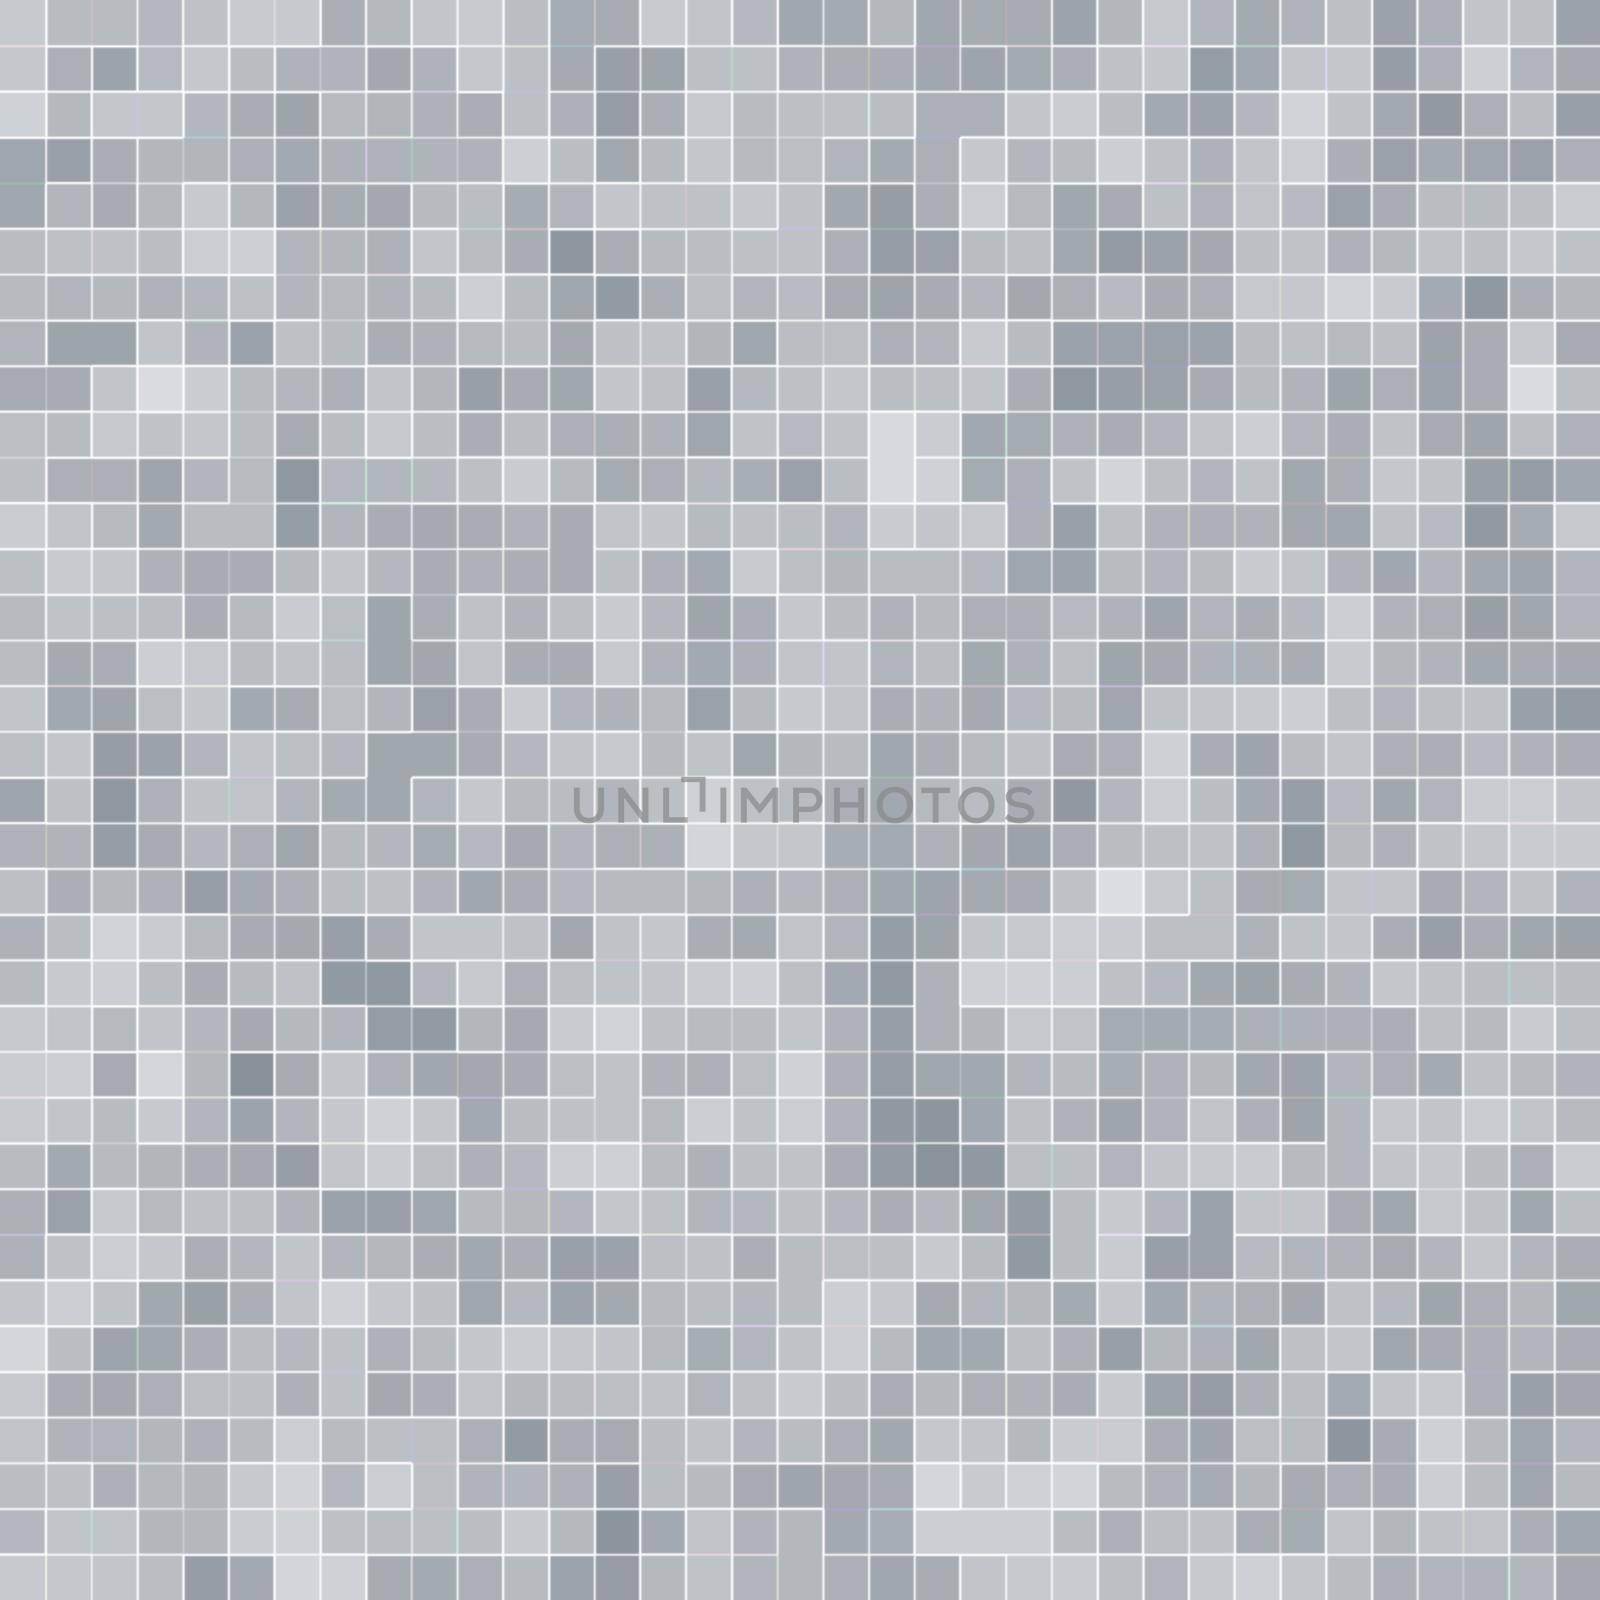 White and Grey the tile wall high resolution wallpaper or brick seamless and texture interior background